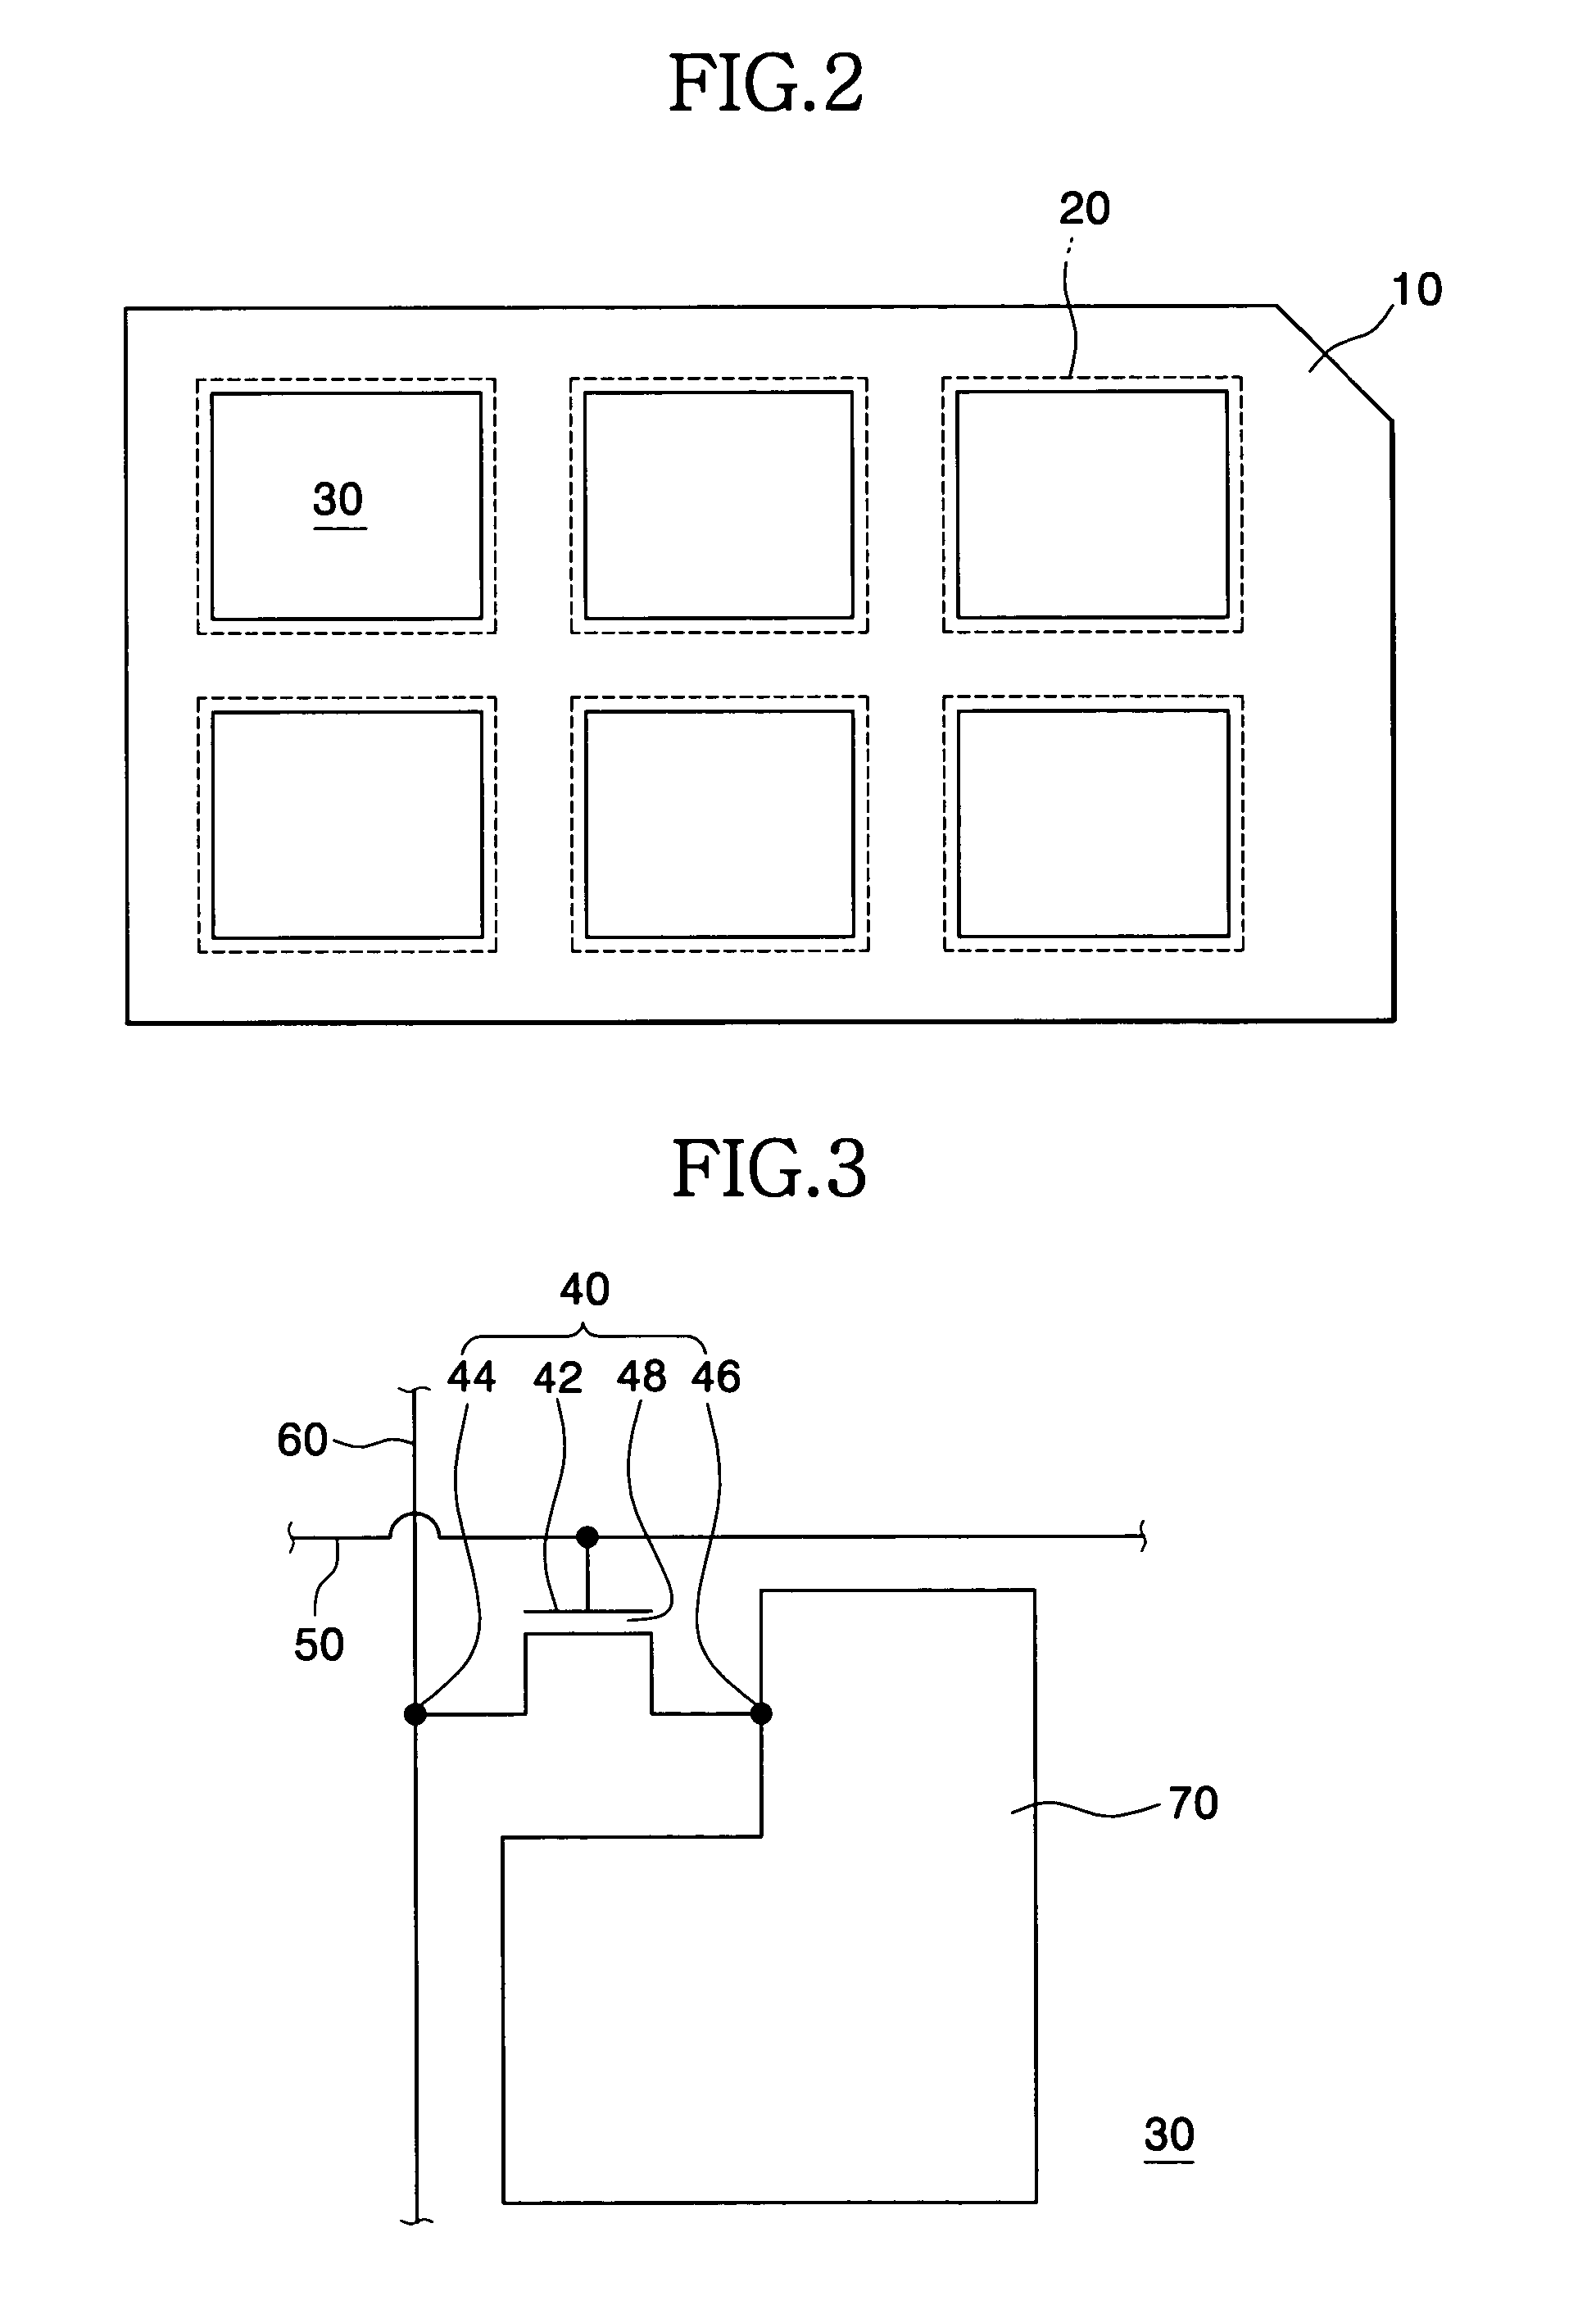 Method and apparatus of forming alignment film